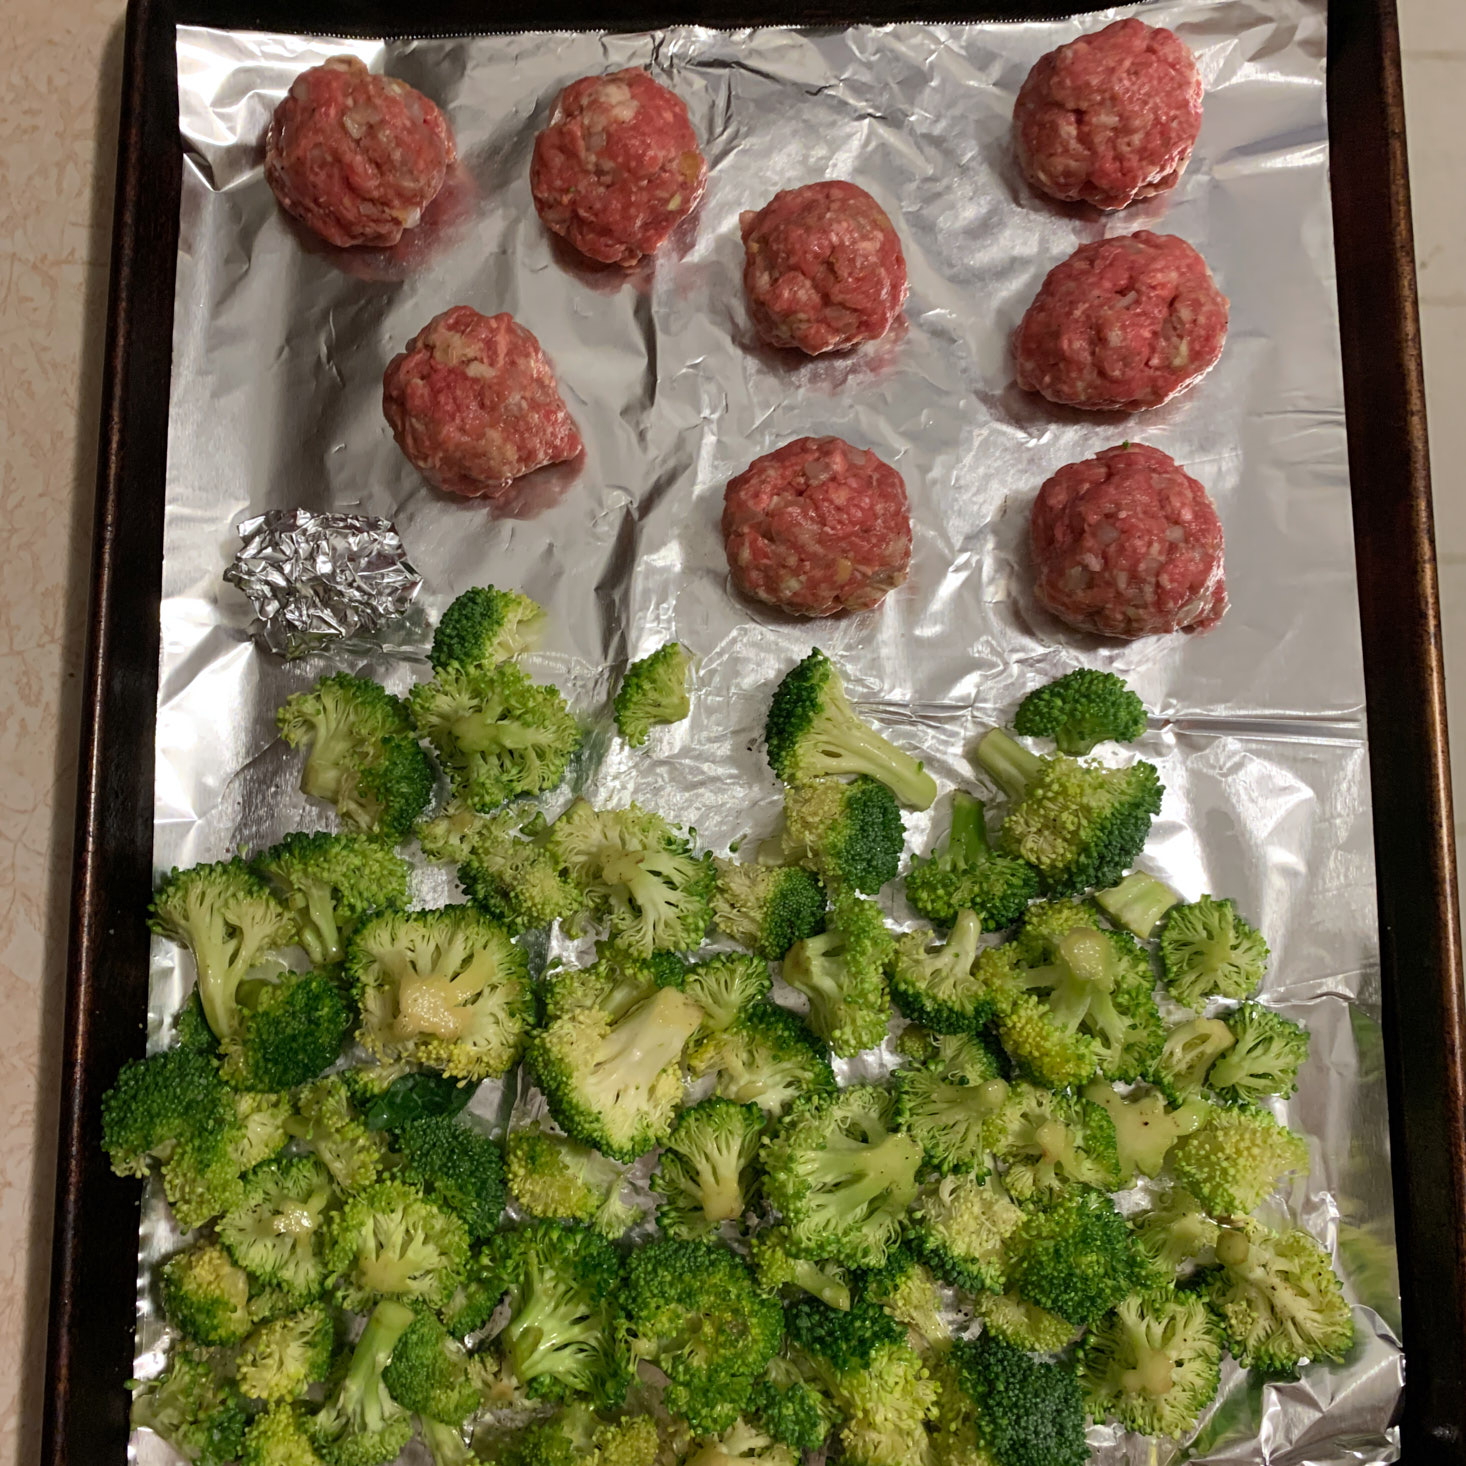 Raw formed meatballs and broccoli on baking sheet